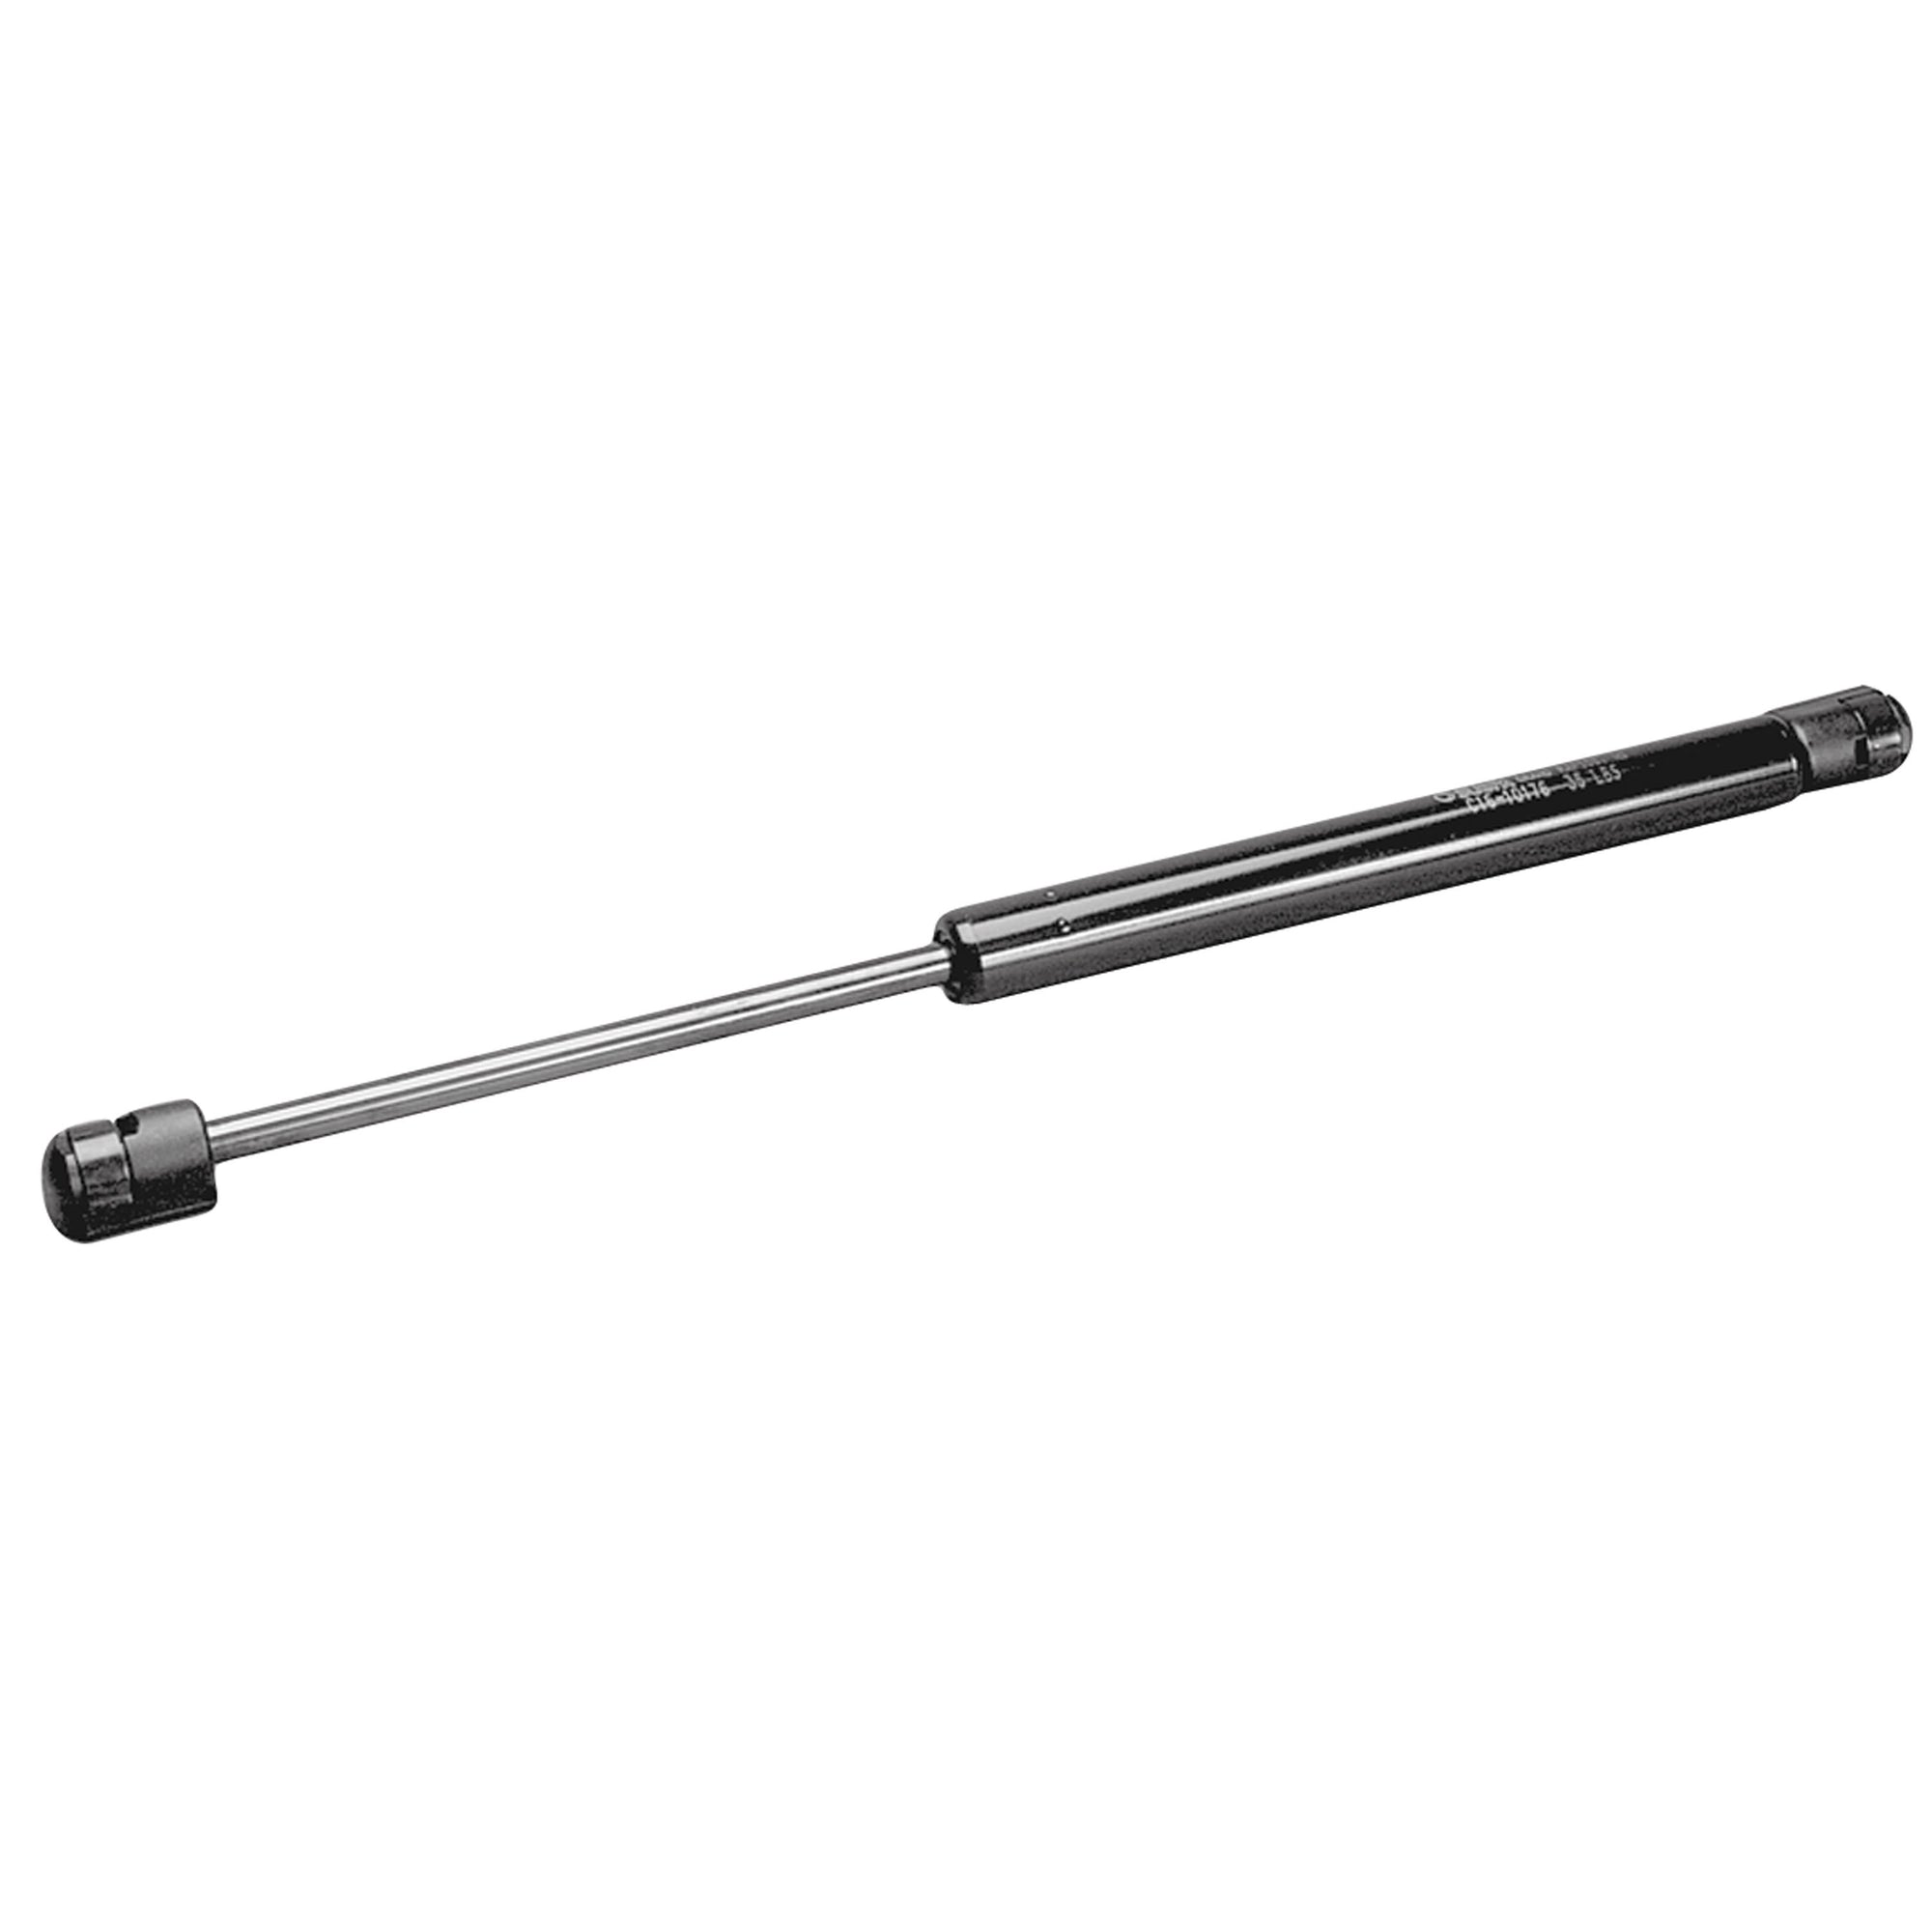 AP Products 010-065 Gas Spring - 12.20" Ext Length, 3.94" Stroke Rod Length, 24 lb. P1 Force